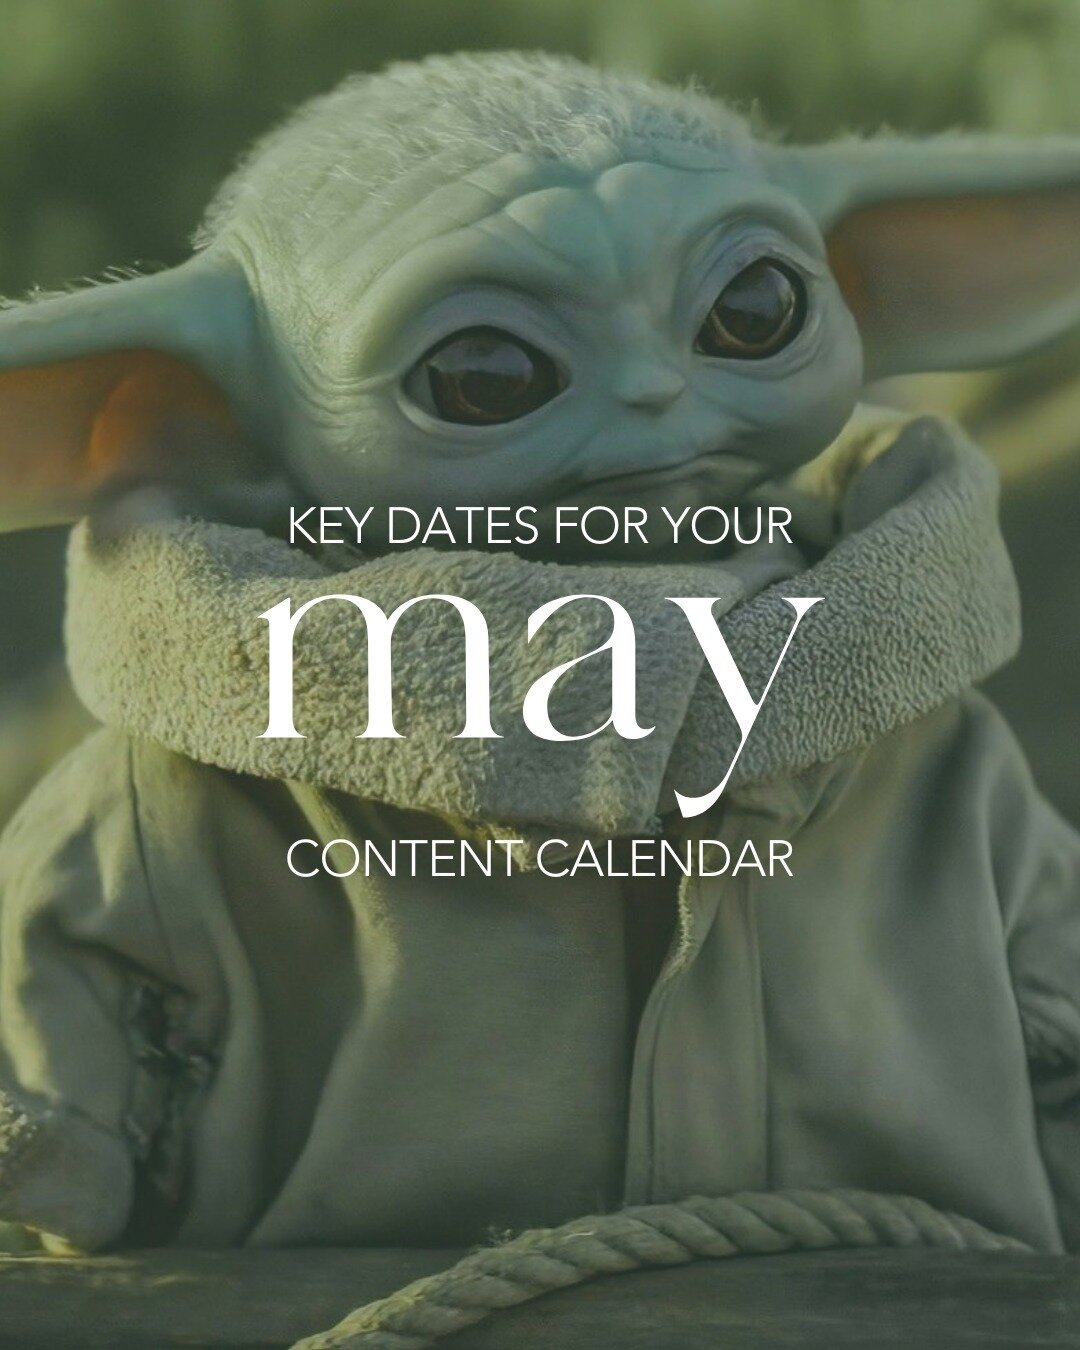 It's time to mark your calendar! 📆⁠
⁠
If you're a little behind on planning your social content for May, we're here to help! ⁠
⁠
Here are some key dates for your content calendar. Do any of them relate to your business?⁠
⁠
Creating content around ke